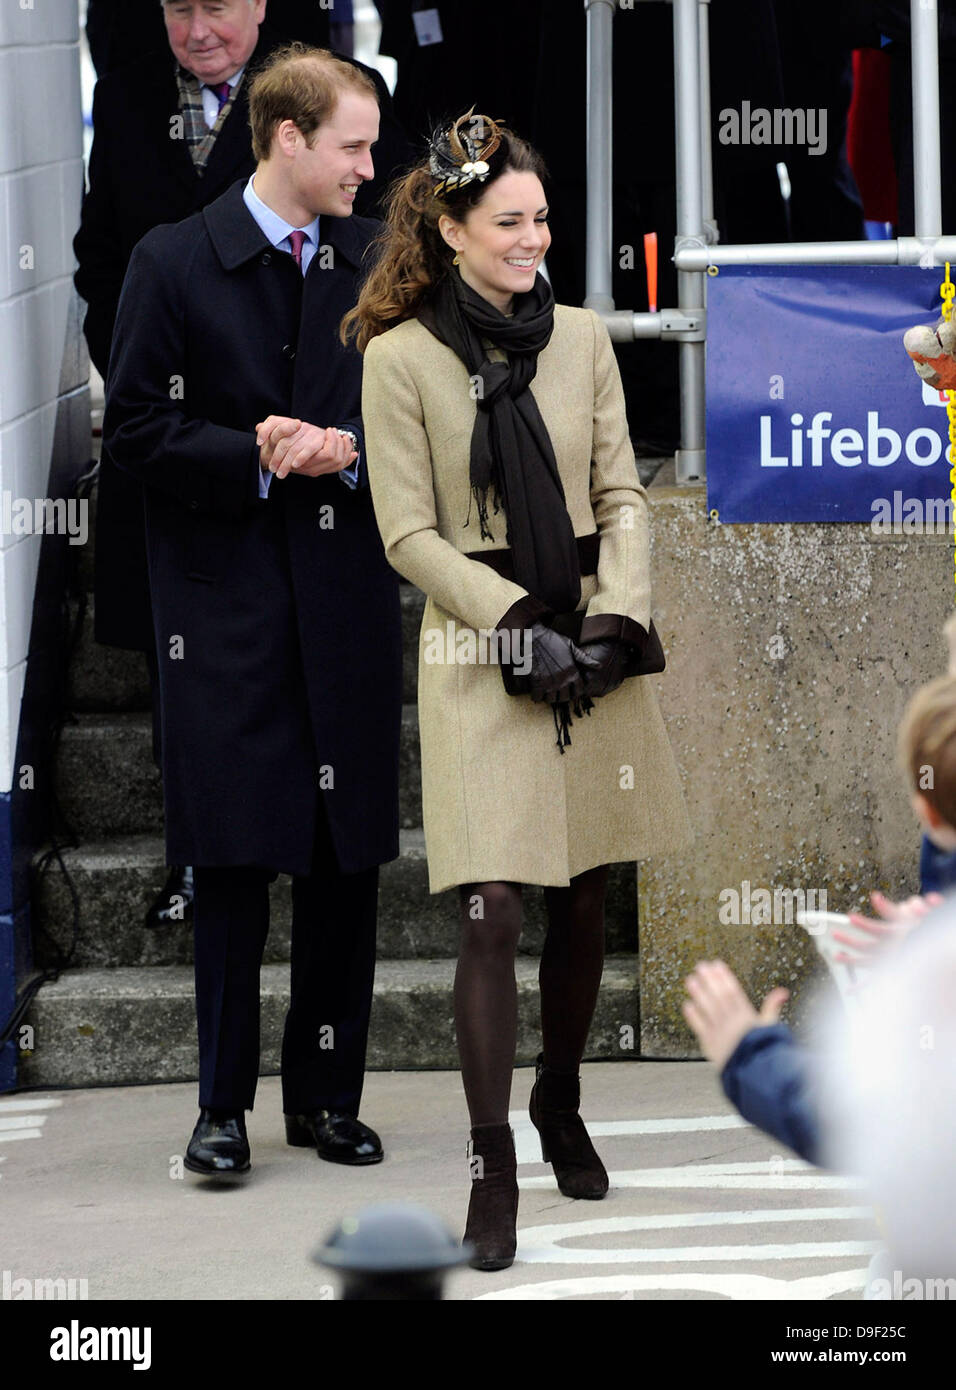 Prince William and Kate Middleton officially launch the new RNLI's lifeboat 'Hereford Endeavour' at Trearddur Bay, Anglesey Trearddur, Wales - 24.02.11 ***No UK Tabloids, Available for The Rest of the World*** Stock Photo